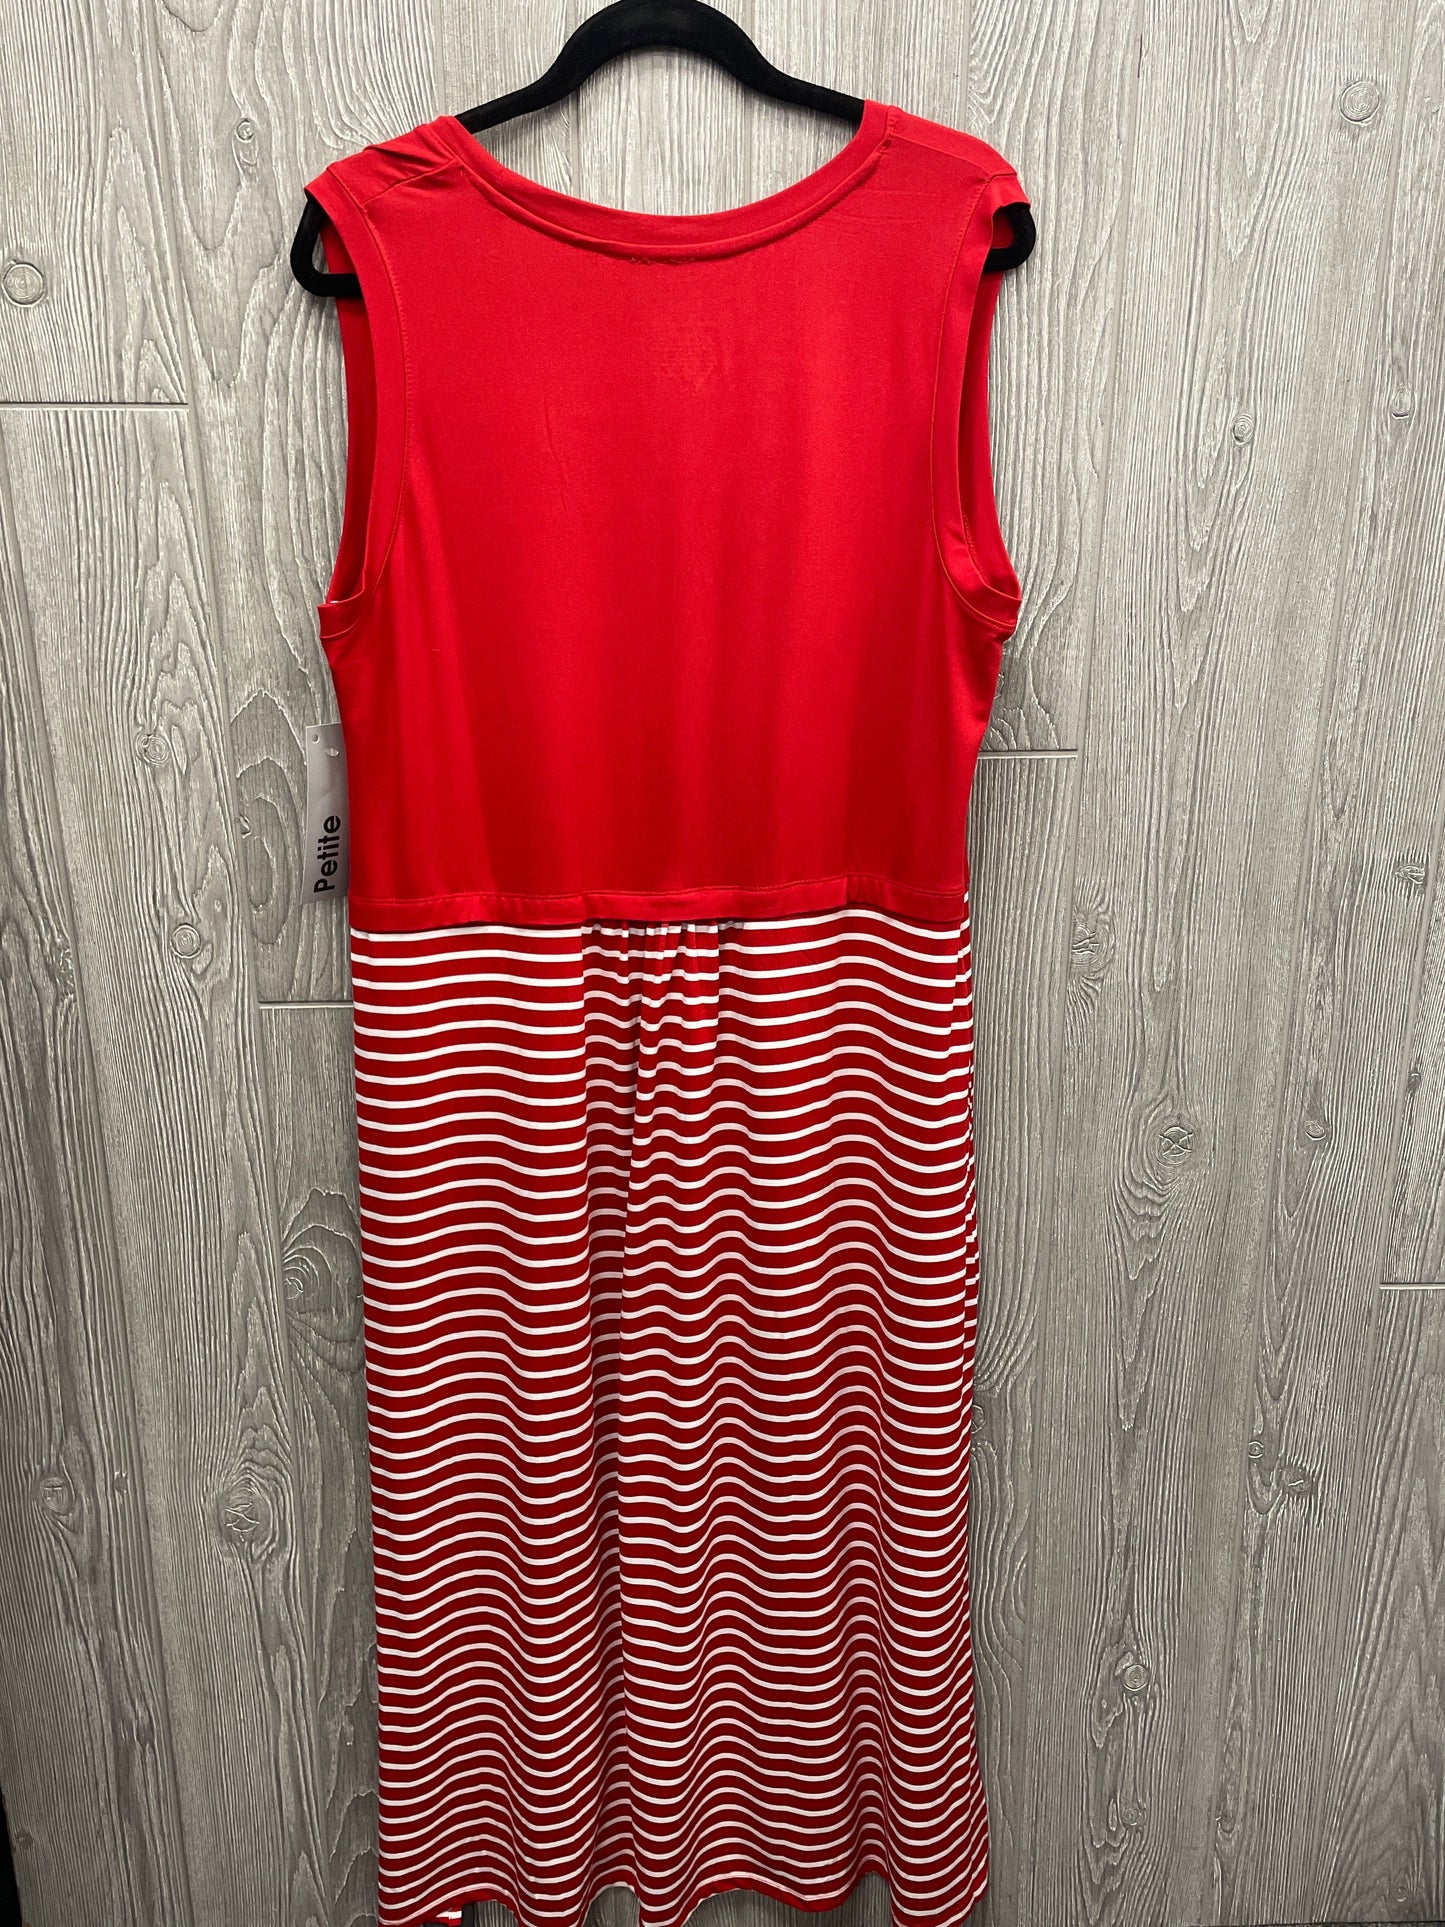 Dress Casual Maxi By Cuddl Duds  Size: Petite   Xl